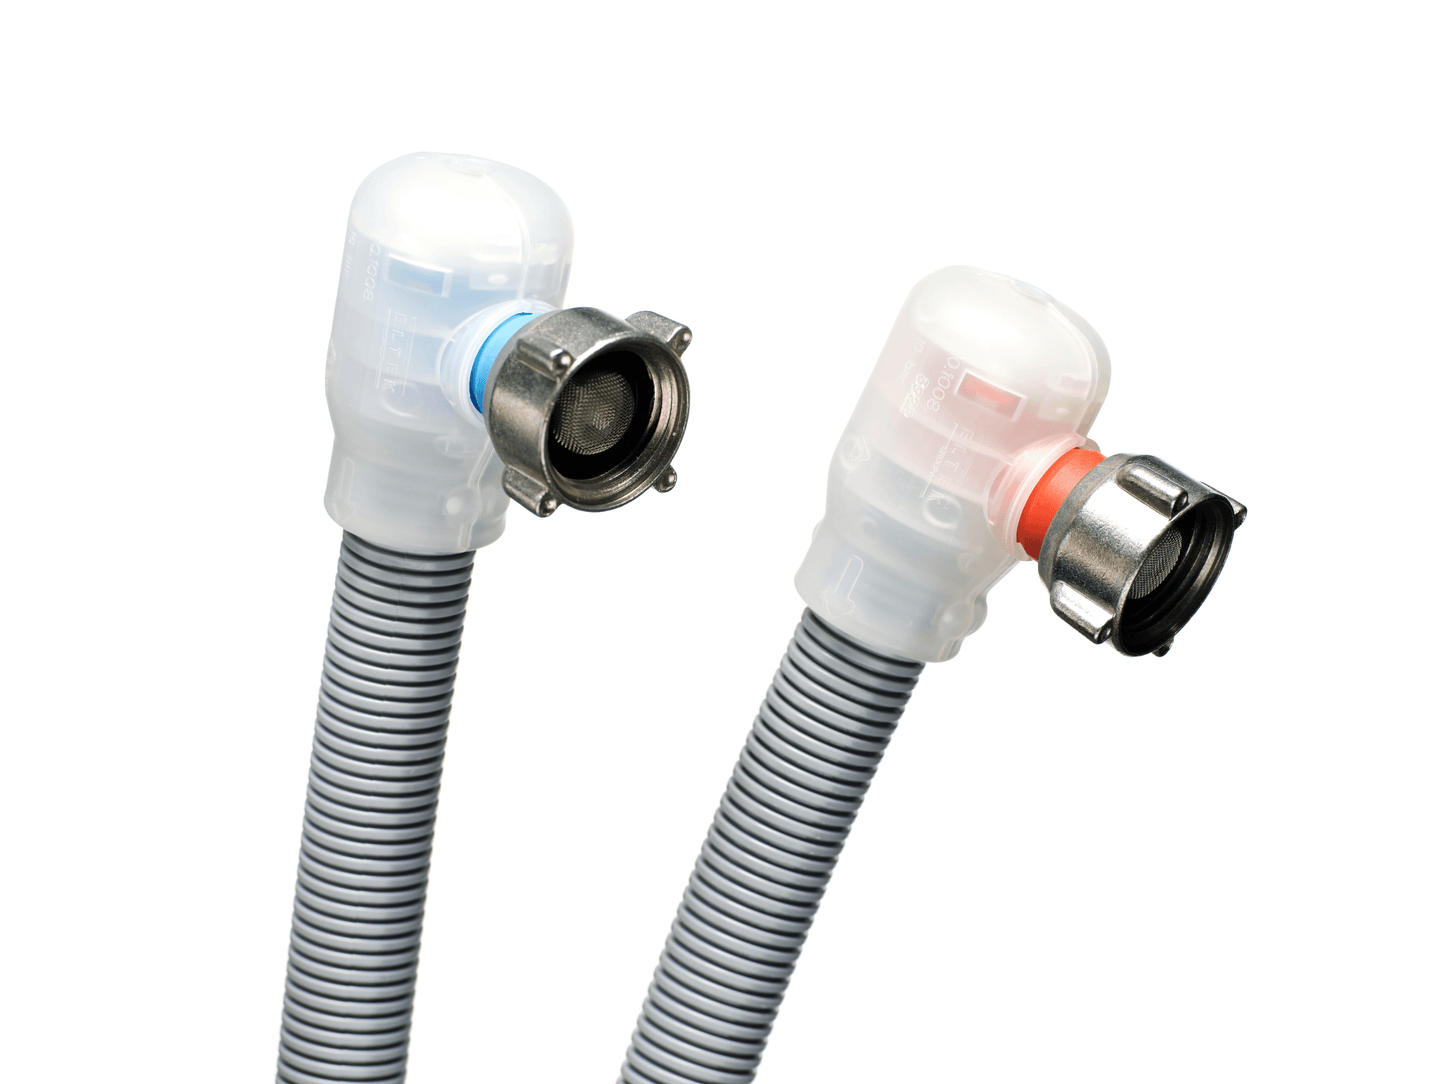 Hot and cold water flood prevention hoses